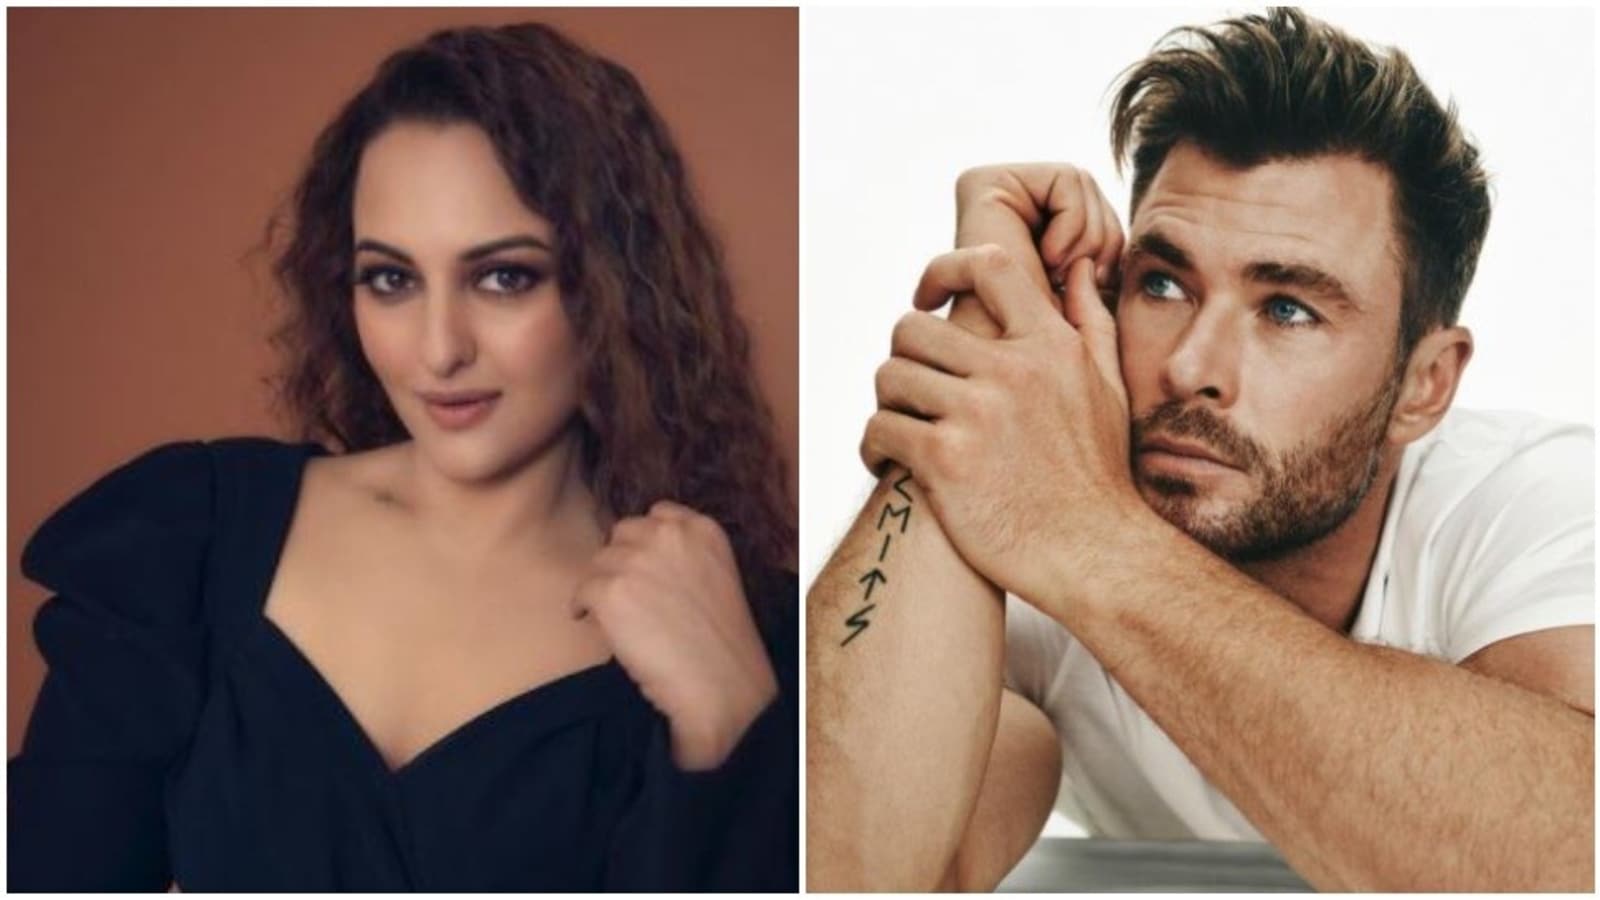 Sonakshi Sinha Xnx Video - Chris goes 'wow' as Sonakshi reveals hobby she discovered last year. Watch  | Bollywood - Hindustan Times